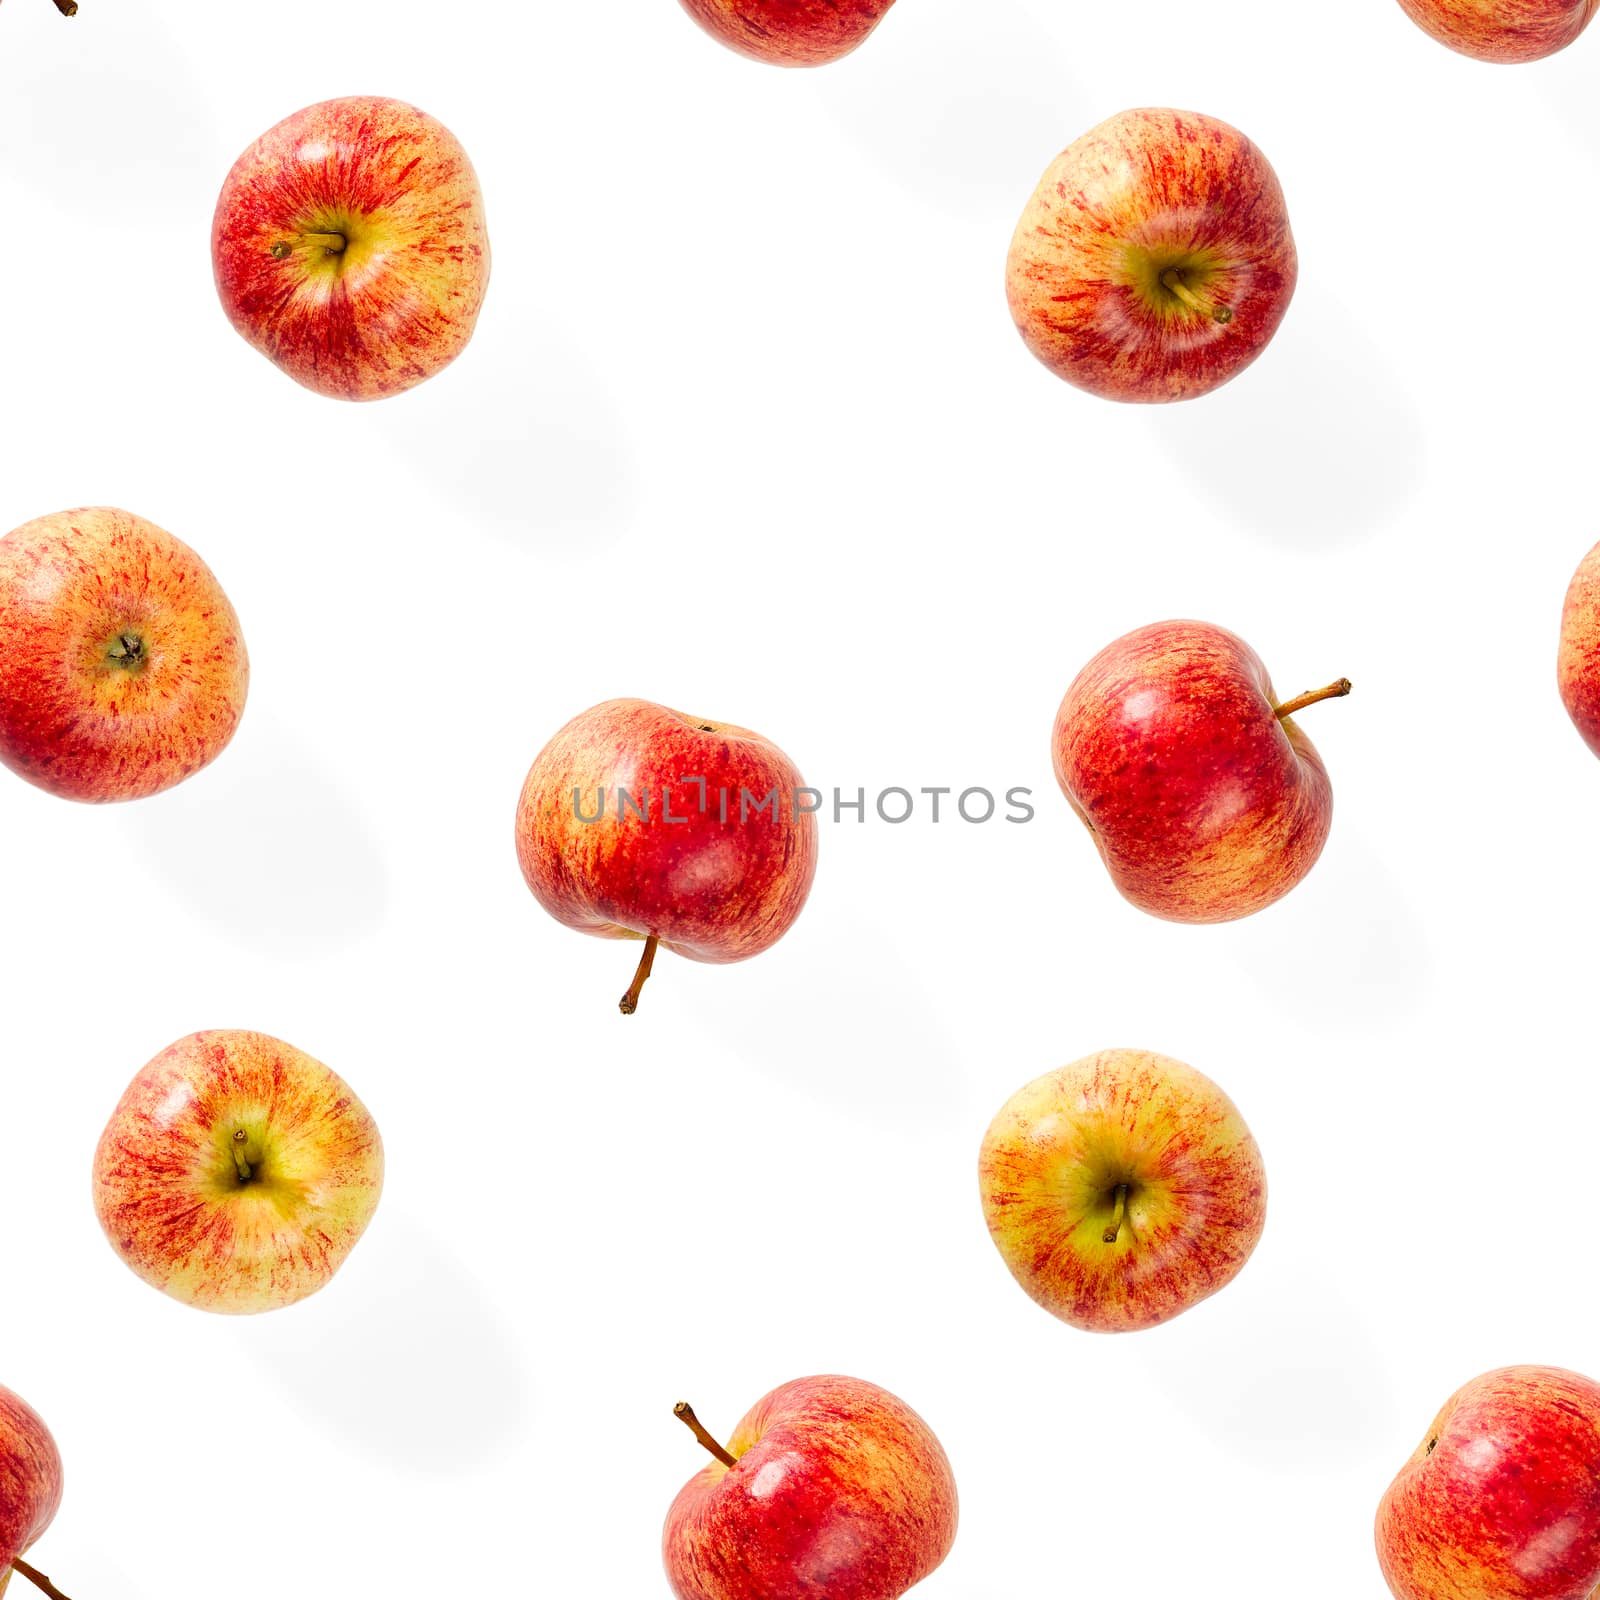 Seamless pattern with ripe apples. Apple seamless pattern on white background. Tropical fruit abstract background.